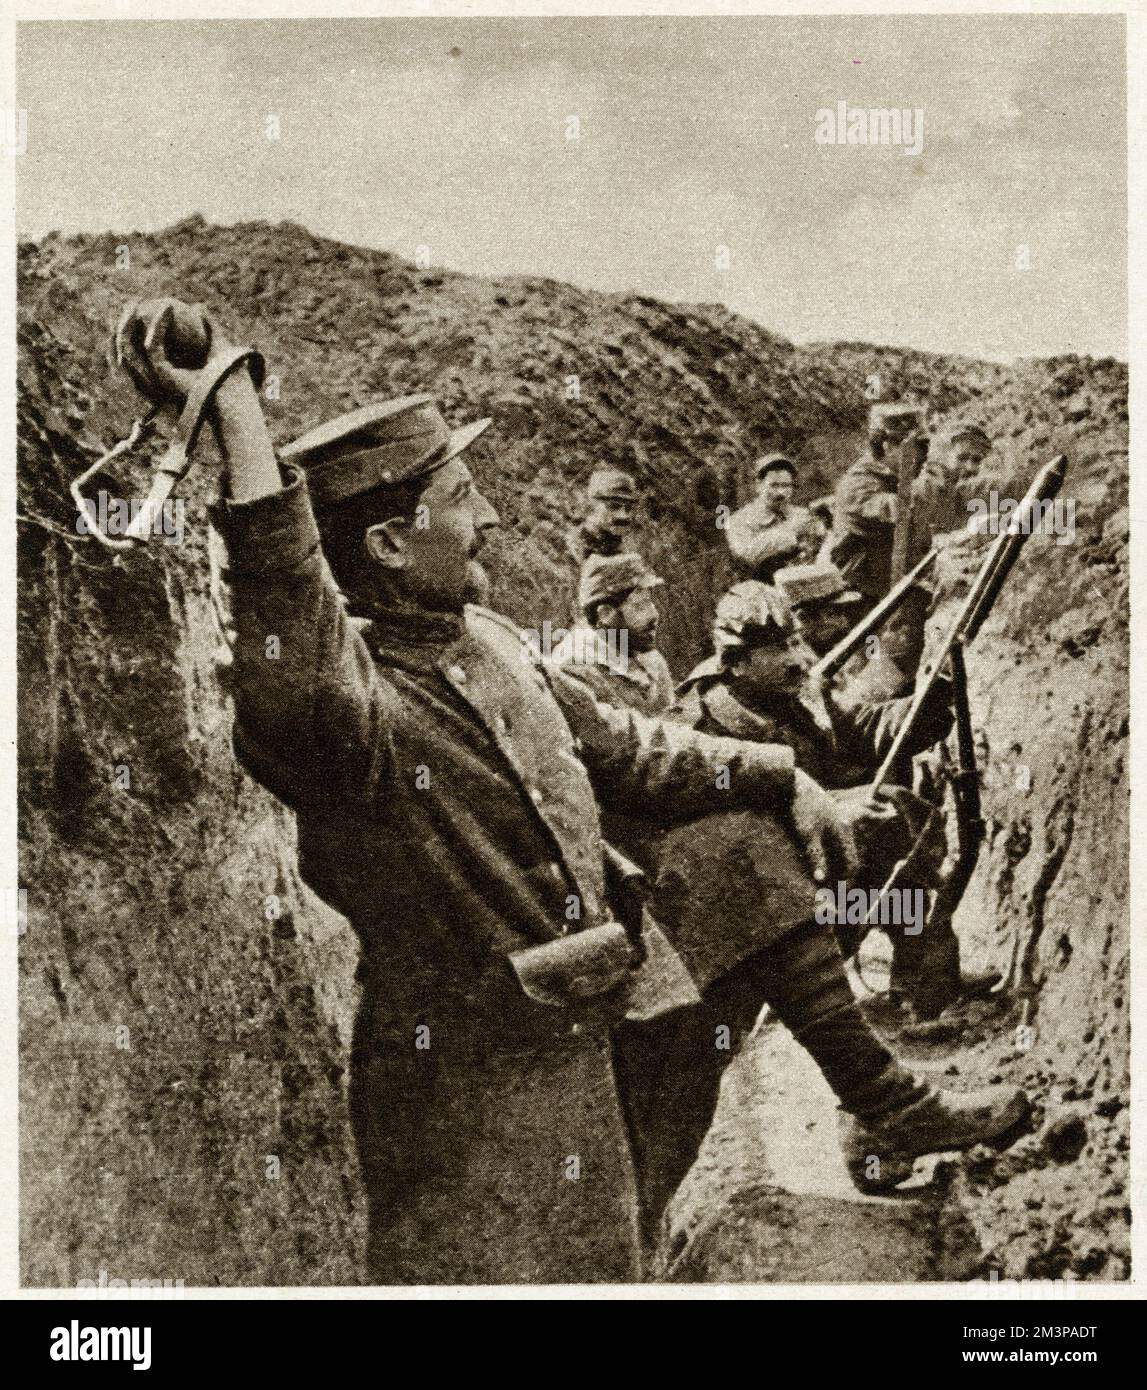 French bracelet grenade, which hooked around the thrower's wrist with a strap or thong.  Innocuous while in the soldier??s hand, the jerk as the grenade extends the strap and flies free by means of swivel-hook pulls out a catch in the bomb and starts the fuse burning.     Date: 1915 Stock Photo